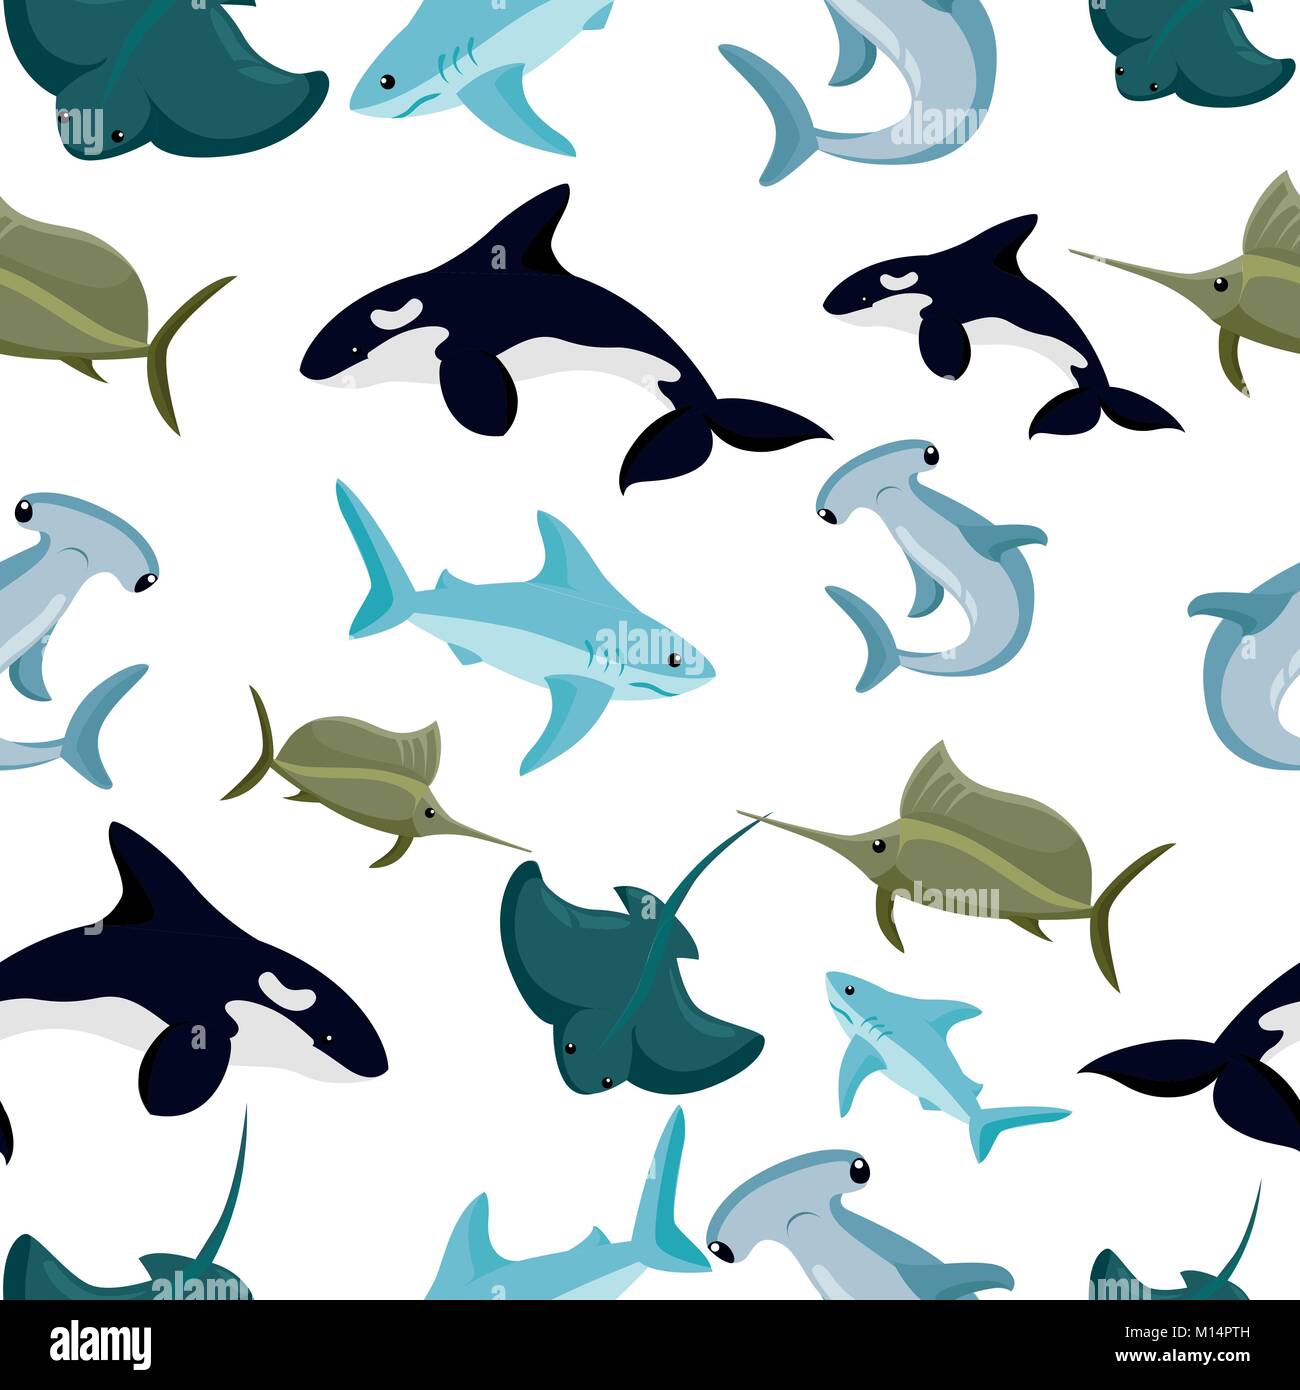 Seamless pattern of hammerhead and blue shark sphyrna manta orca vector illustration on white background website page and mobile app design. Stock Vector